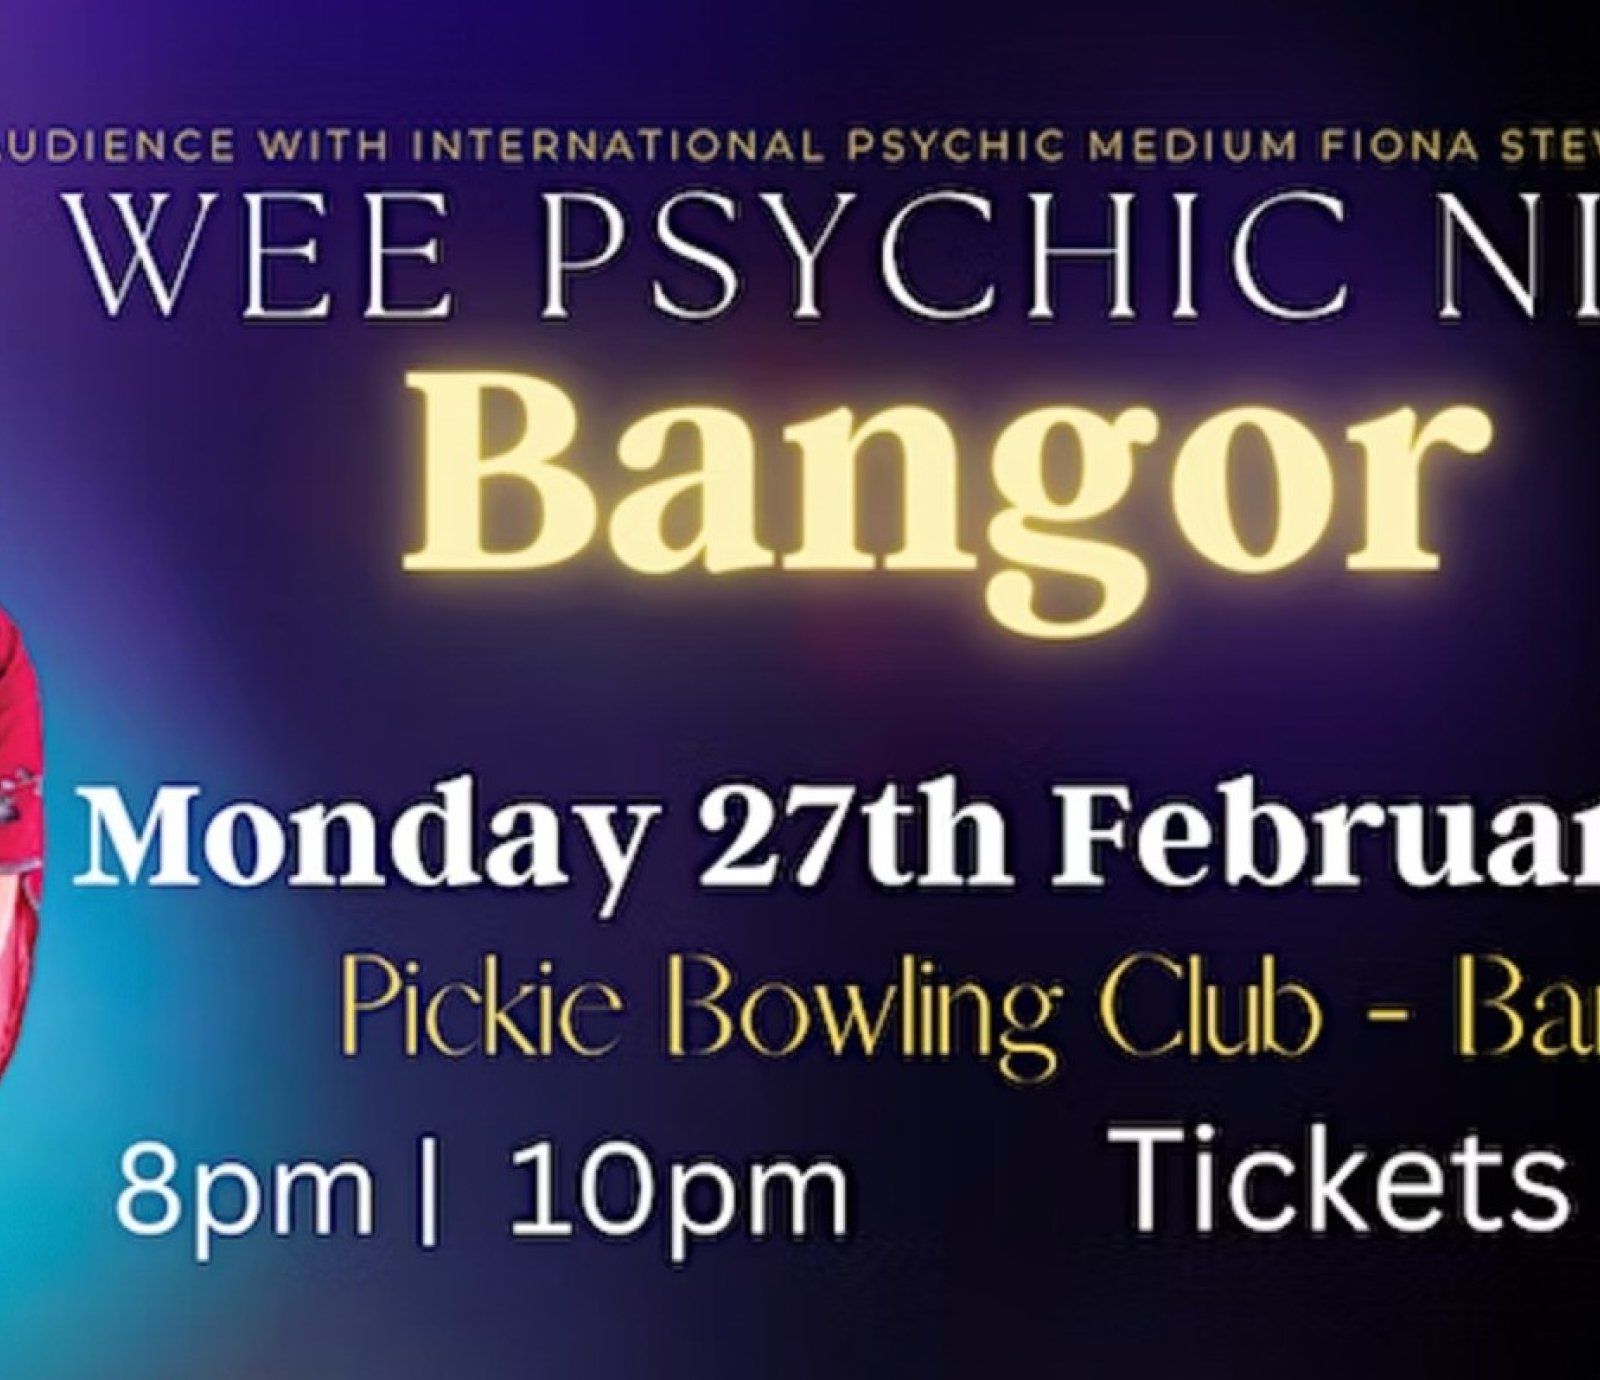 A Wee Psychic Night in Bangor